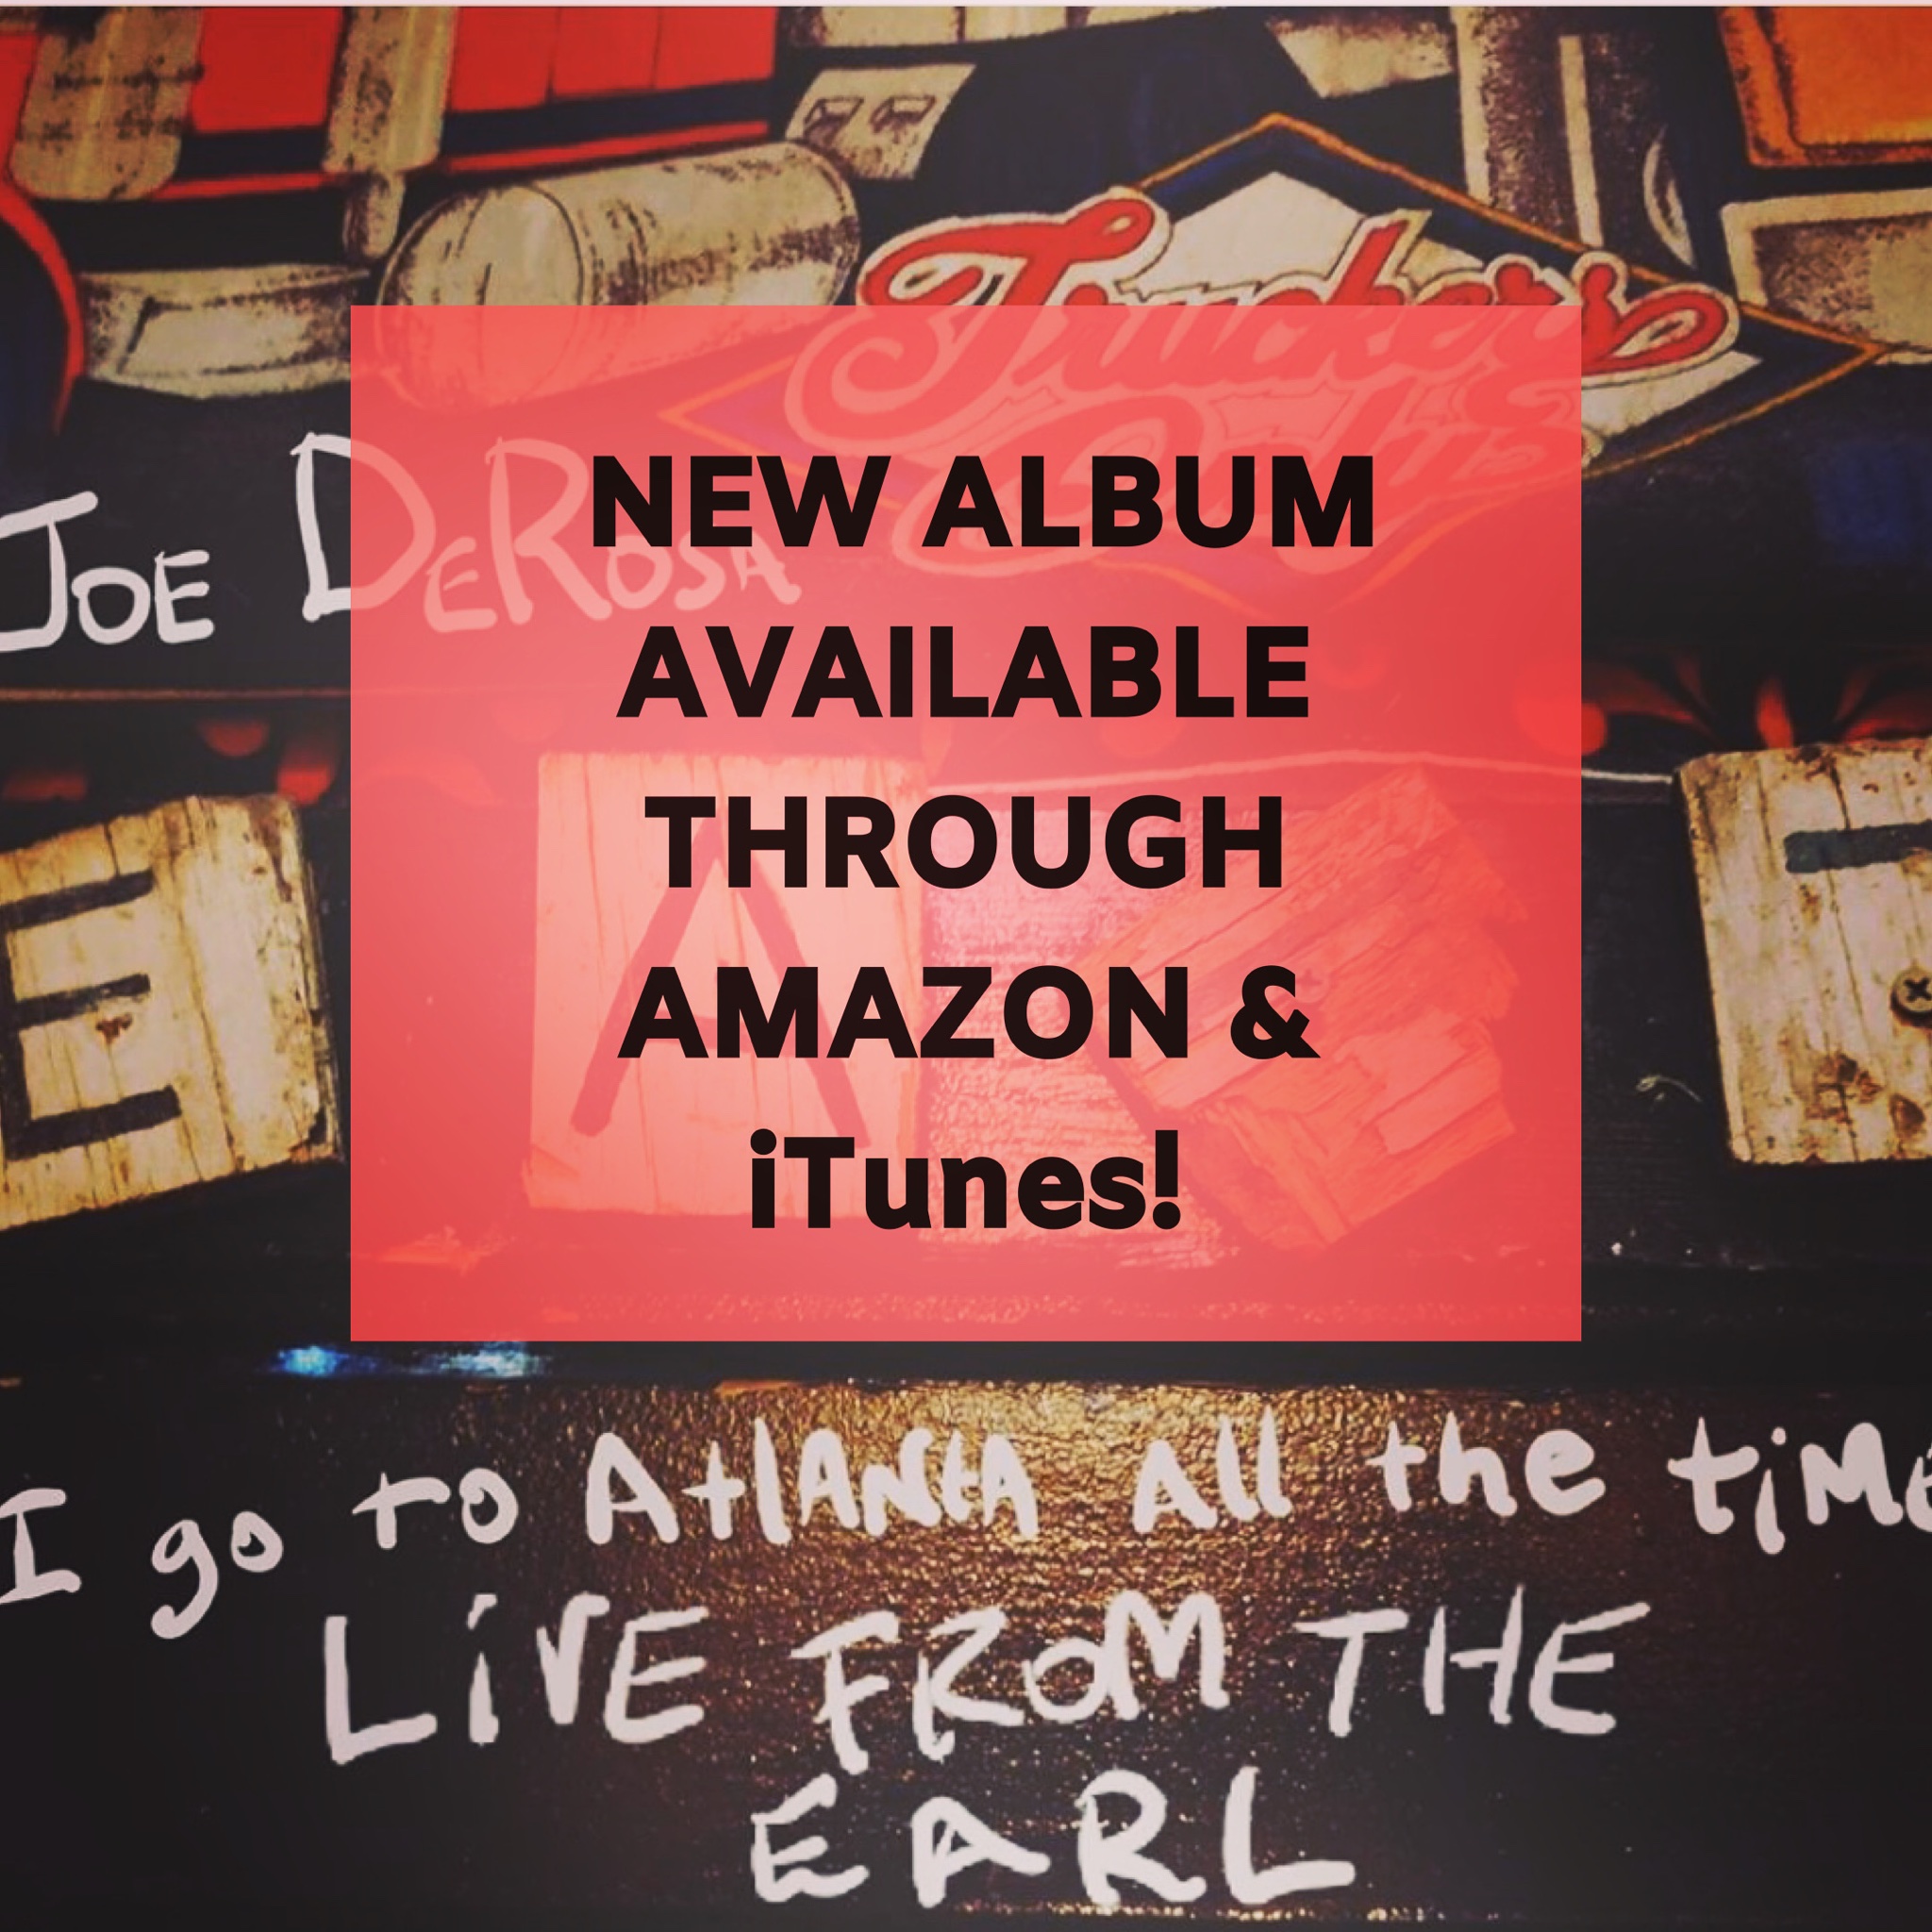 Joe DeRosa on Twitter: "Oh shit, it's here! My newest album I Go To Atlanta  All The Time is *officially* available today. Start your morning routine  with a cup of Joe and